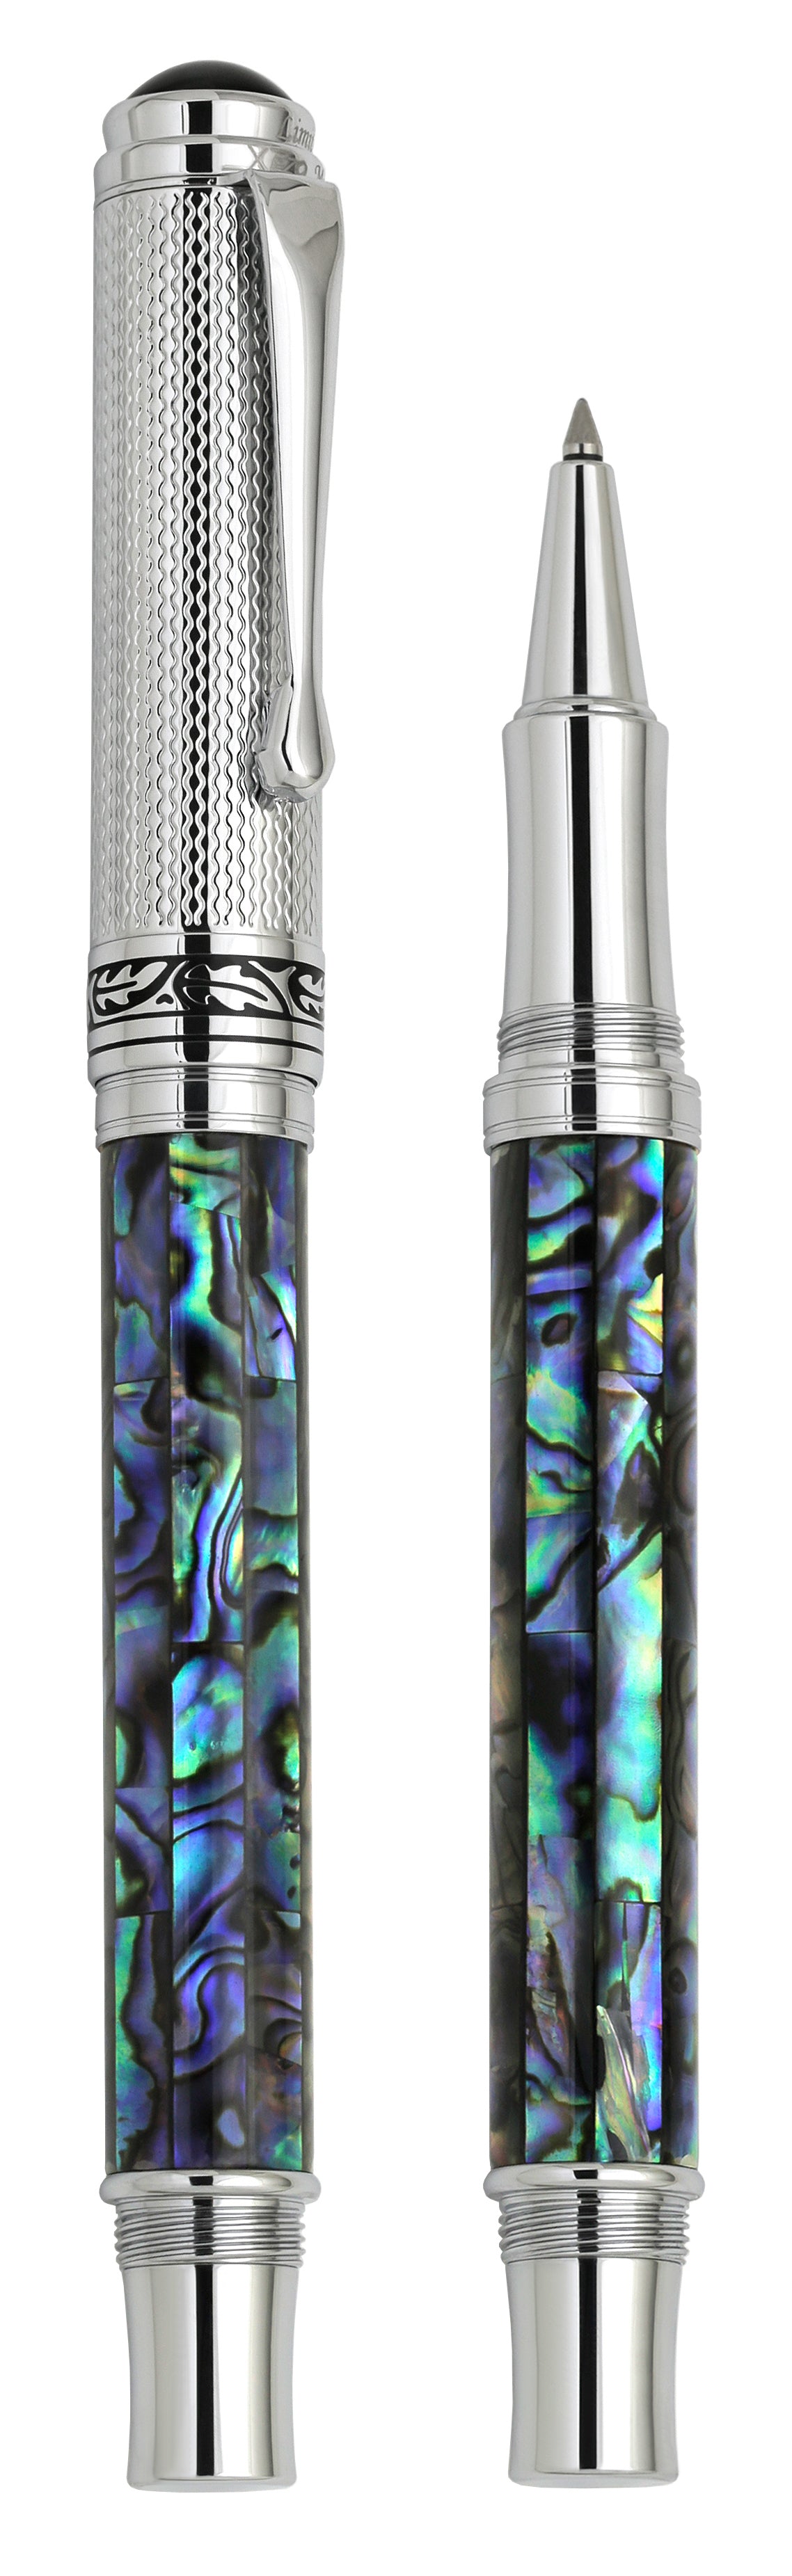 Xezo - Vertical view of two Maestro Paua Abalone Chrome R rollerball pens. The pen on the left is capped, and the pen on the right has no cap